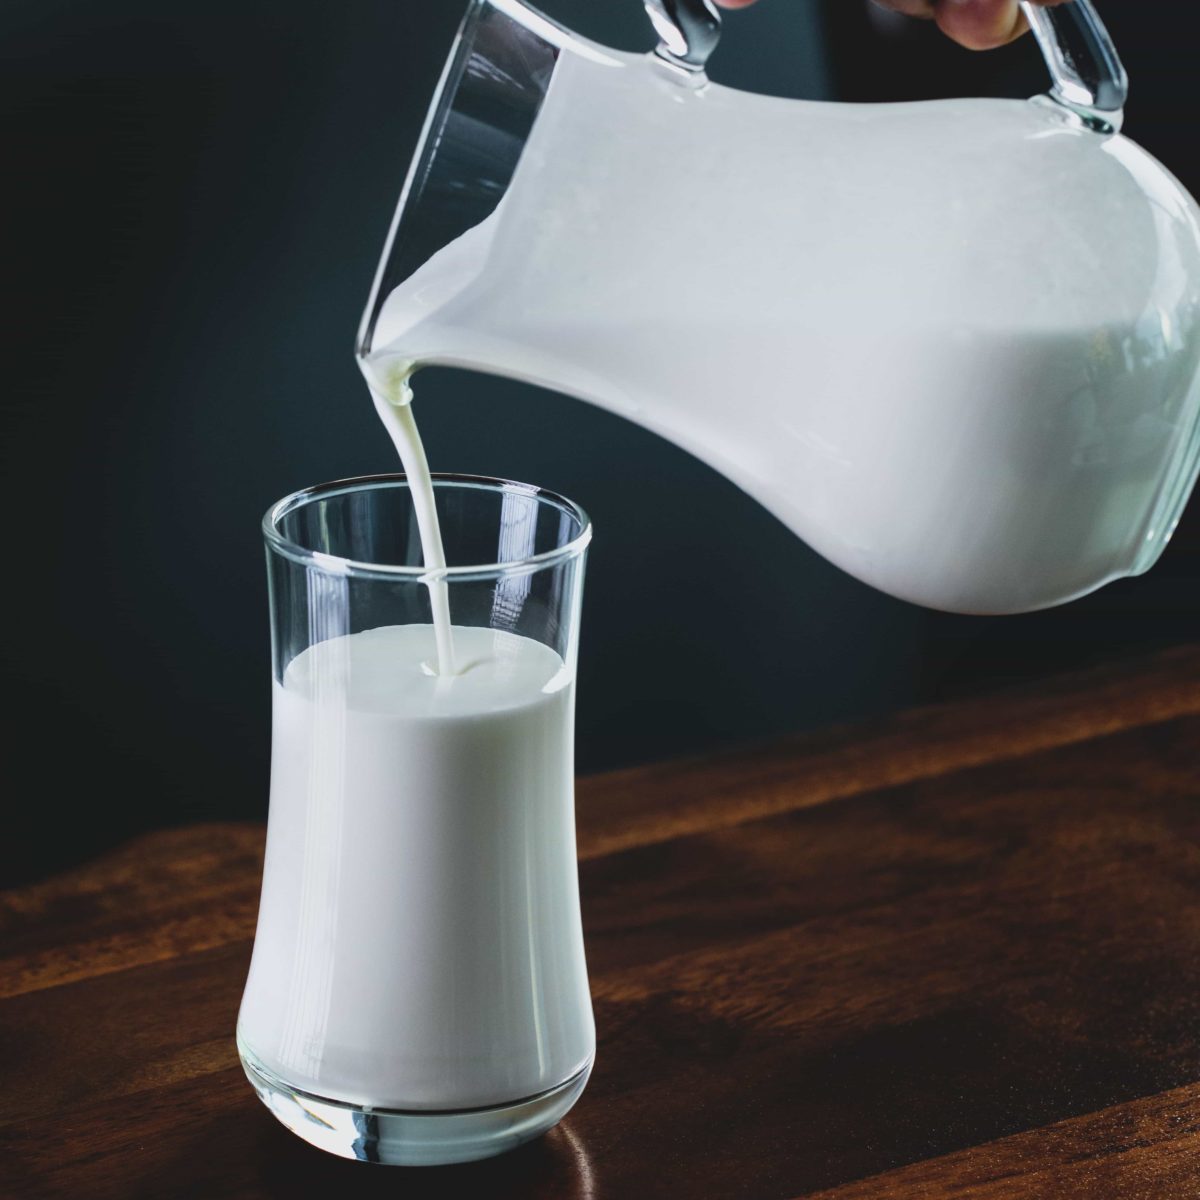 Milk Isn’t Bad For You (But 6 Types of People May Want to Avoid It)